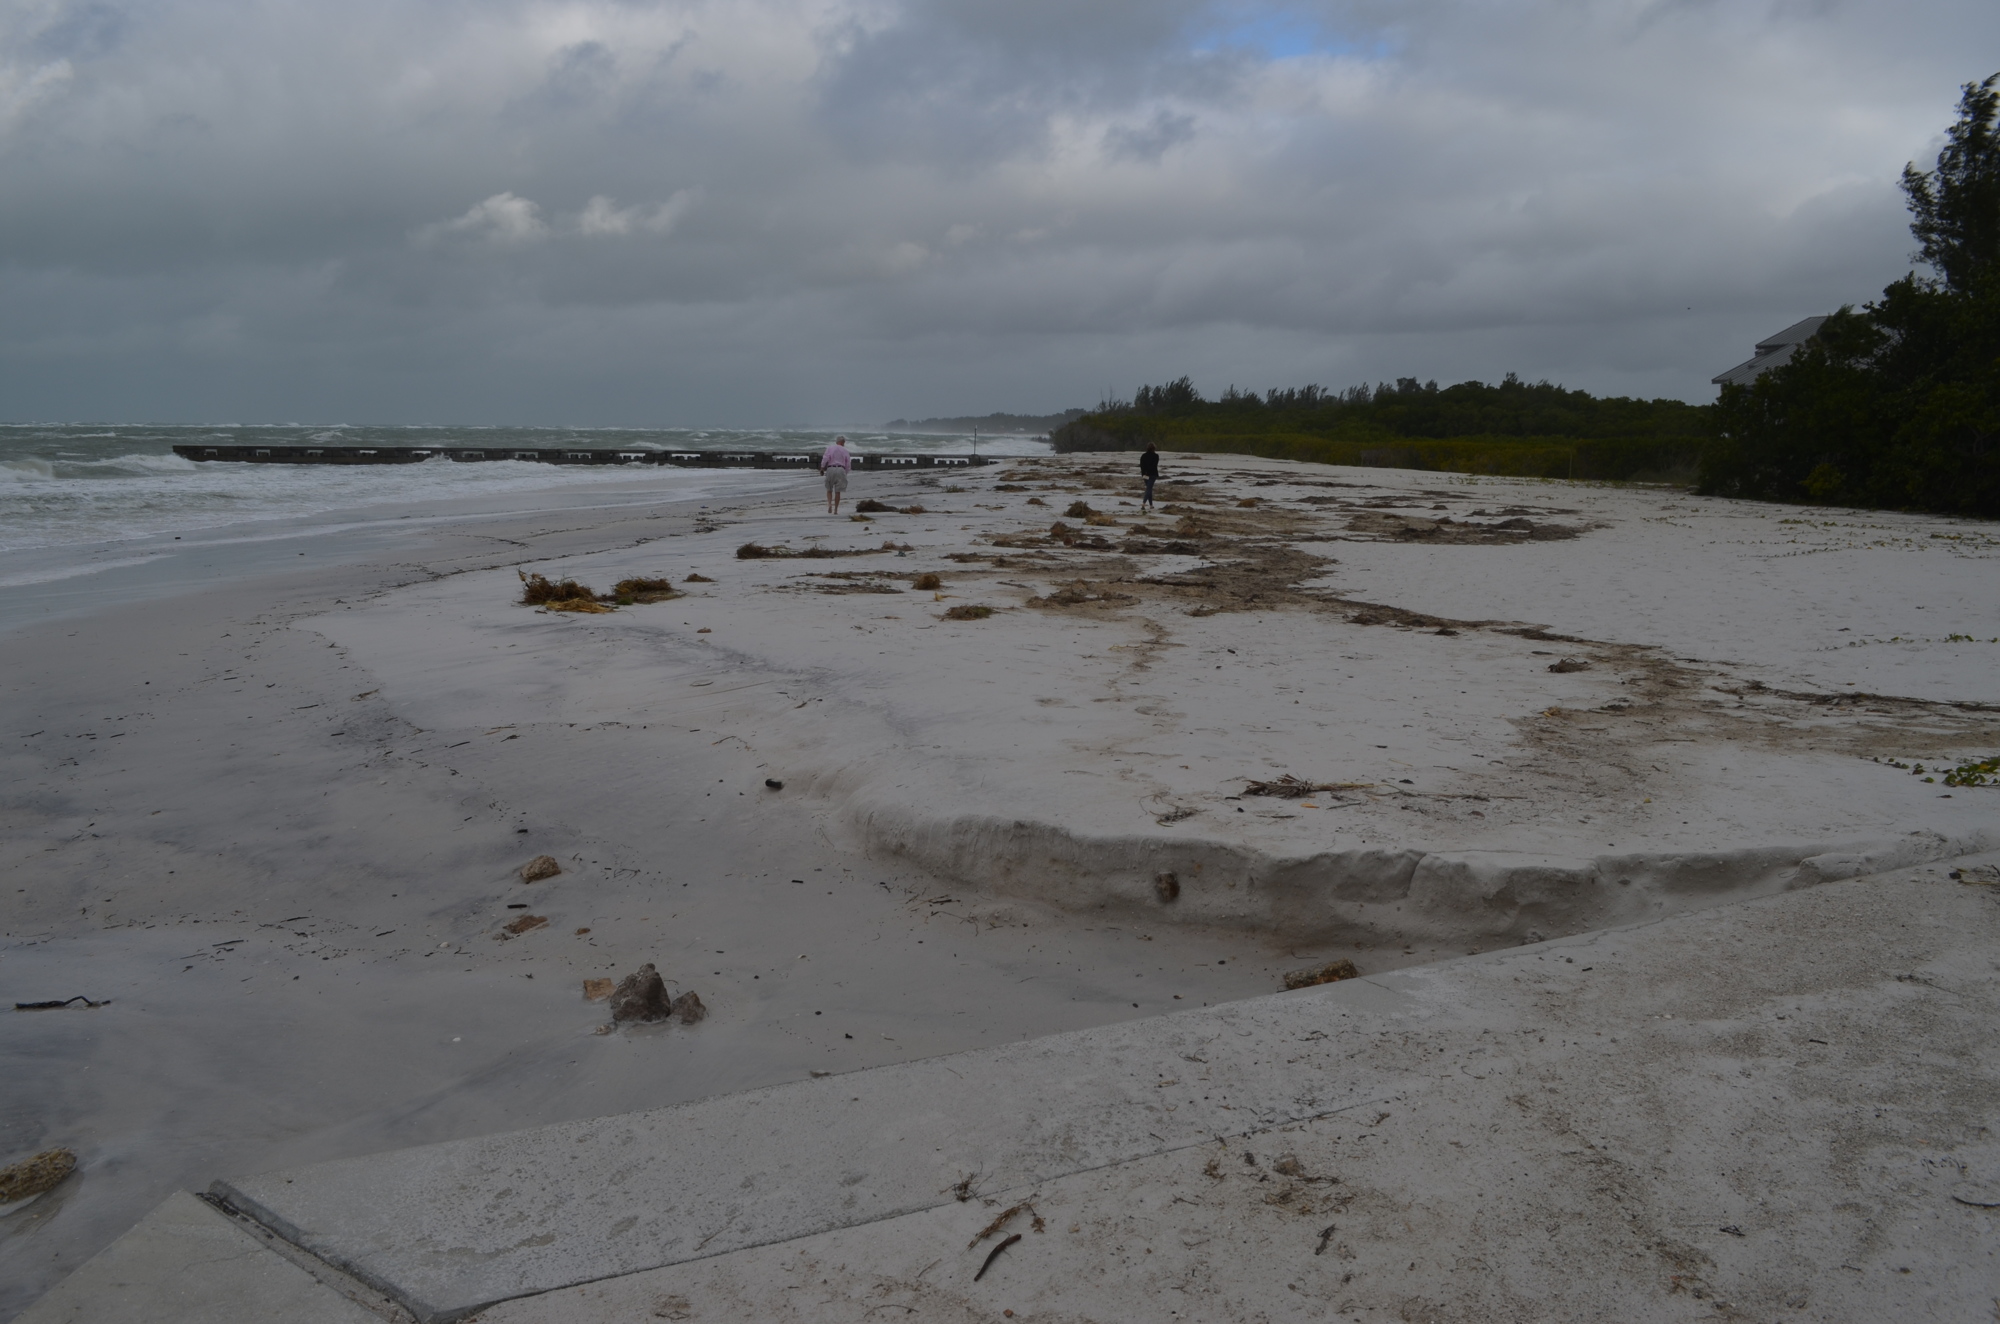 Strong storms and winds continue to pummel the north end of Longboat Key Sunday at the North Shore Road beach access, causing sand to recede between two groins constructed in the area to hold sand.